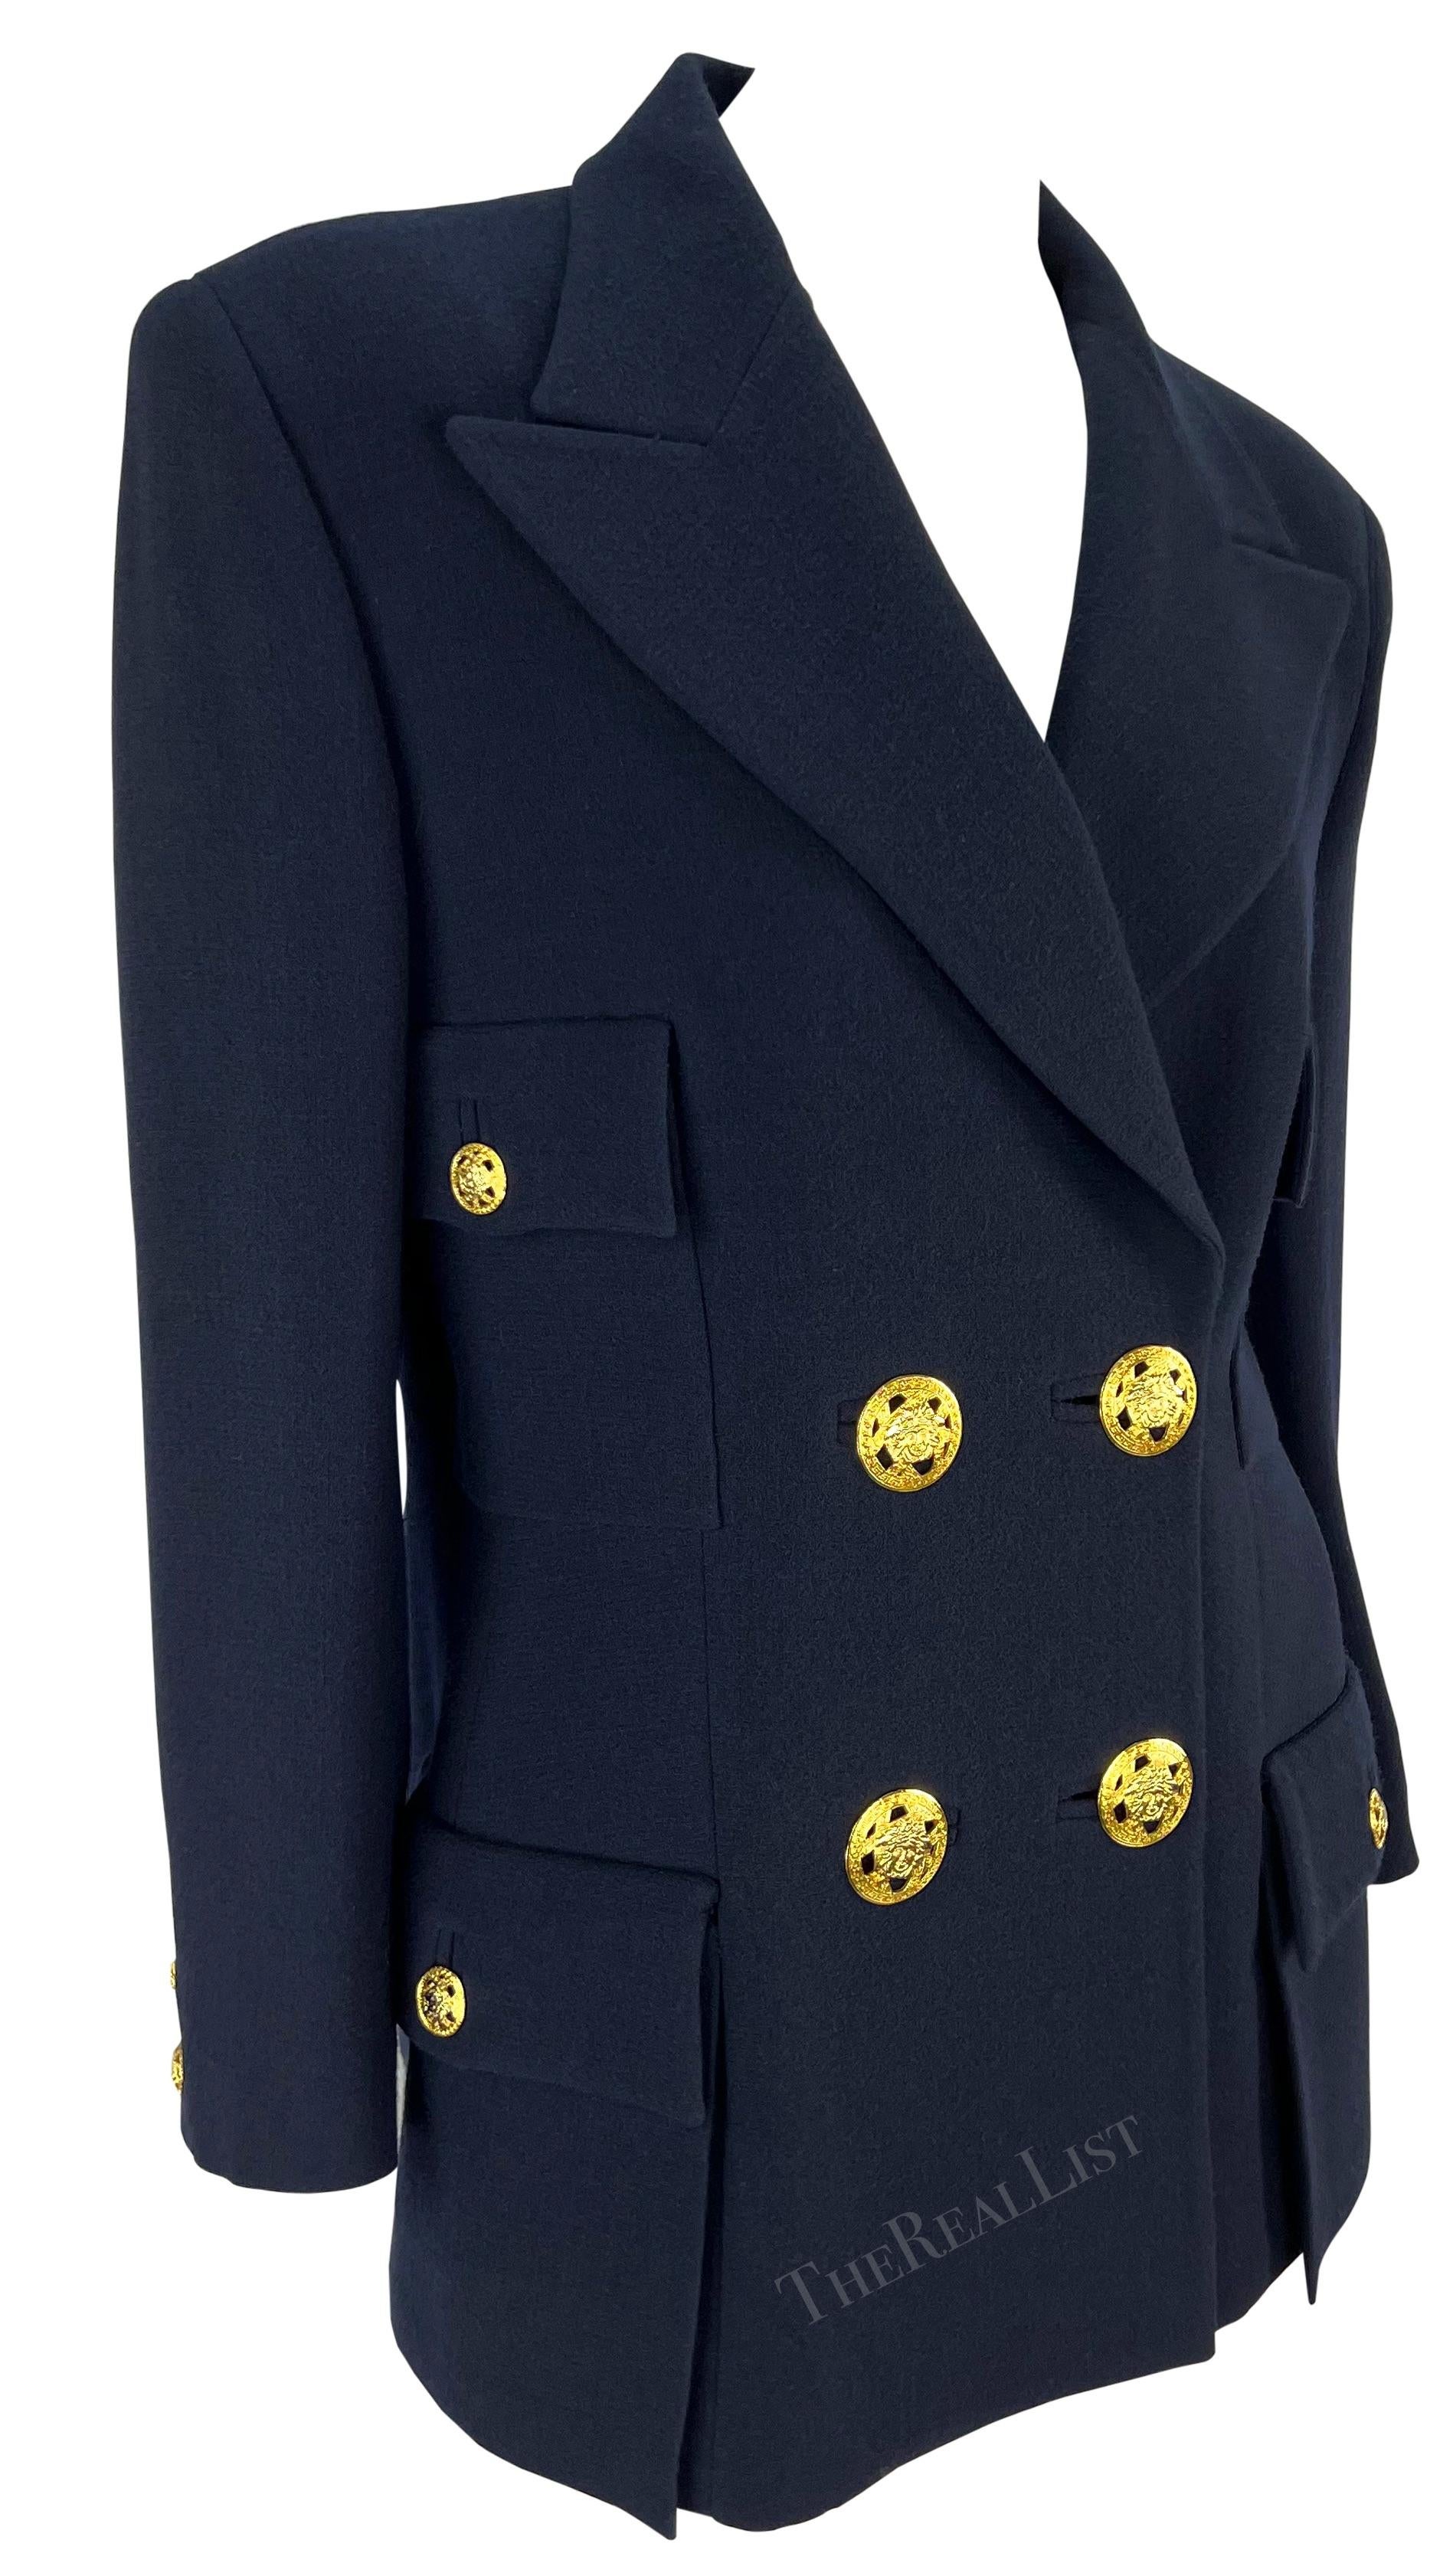 S/S 1995 Gianni Versace Runway Ad Navy Double Breasted Medusa Blazer For Sale 5